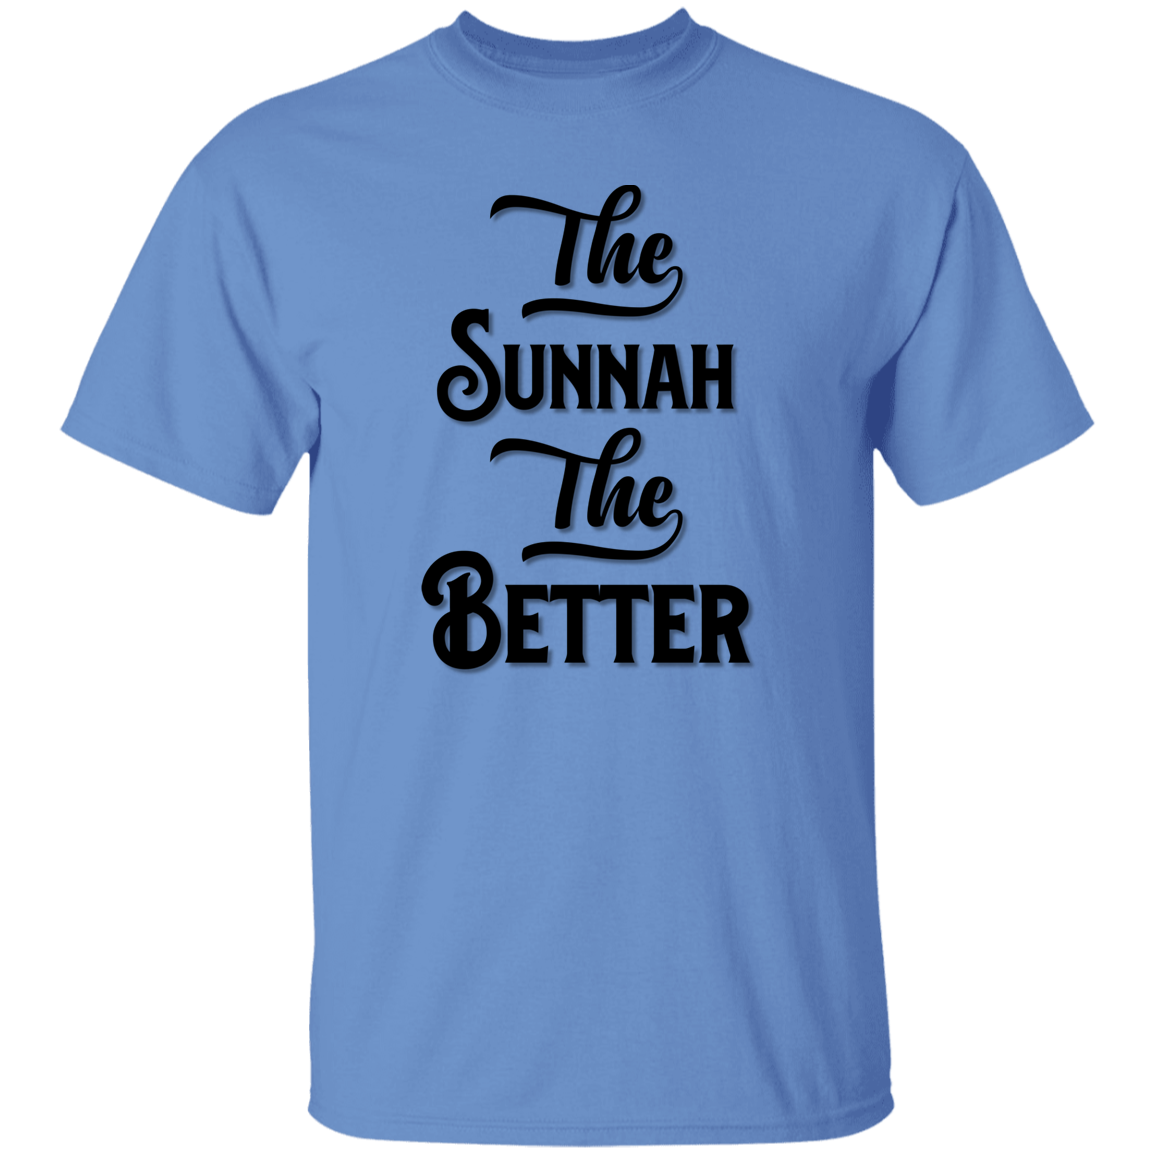 THE SUNNAH THE BETTER  T-Shirt (MORE COLOR OPTIONS)